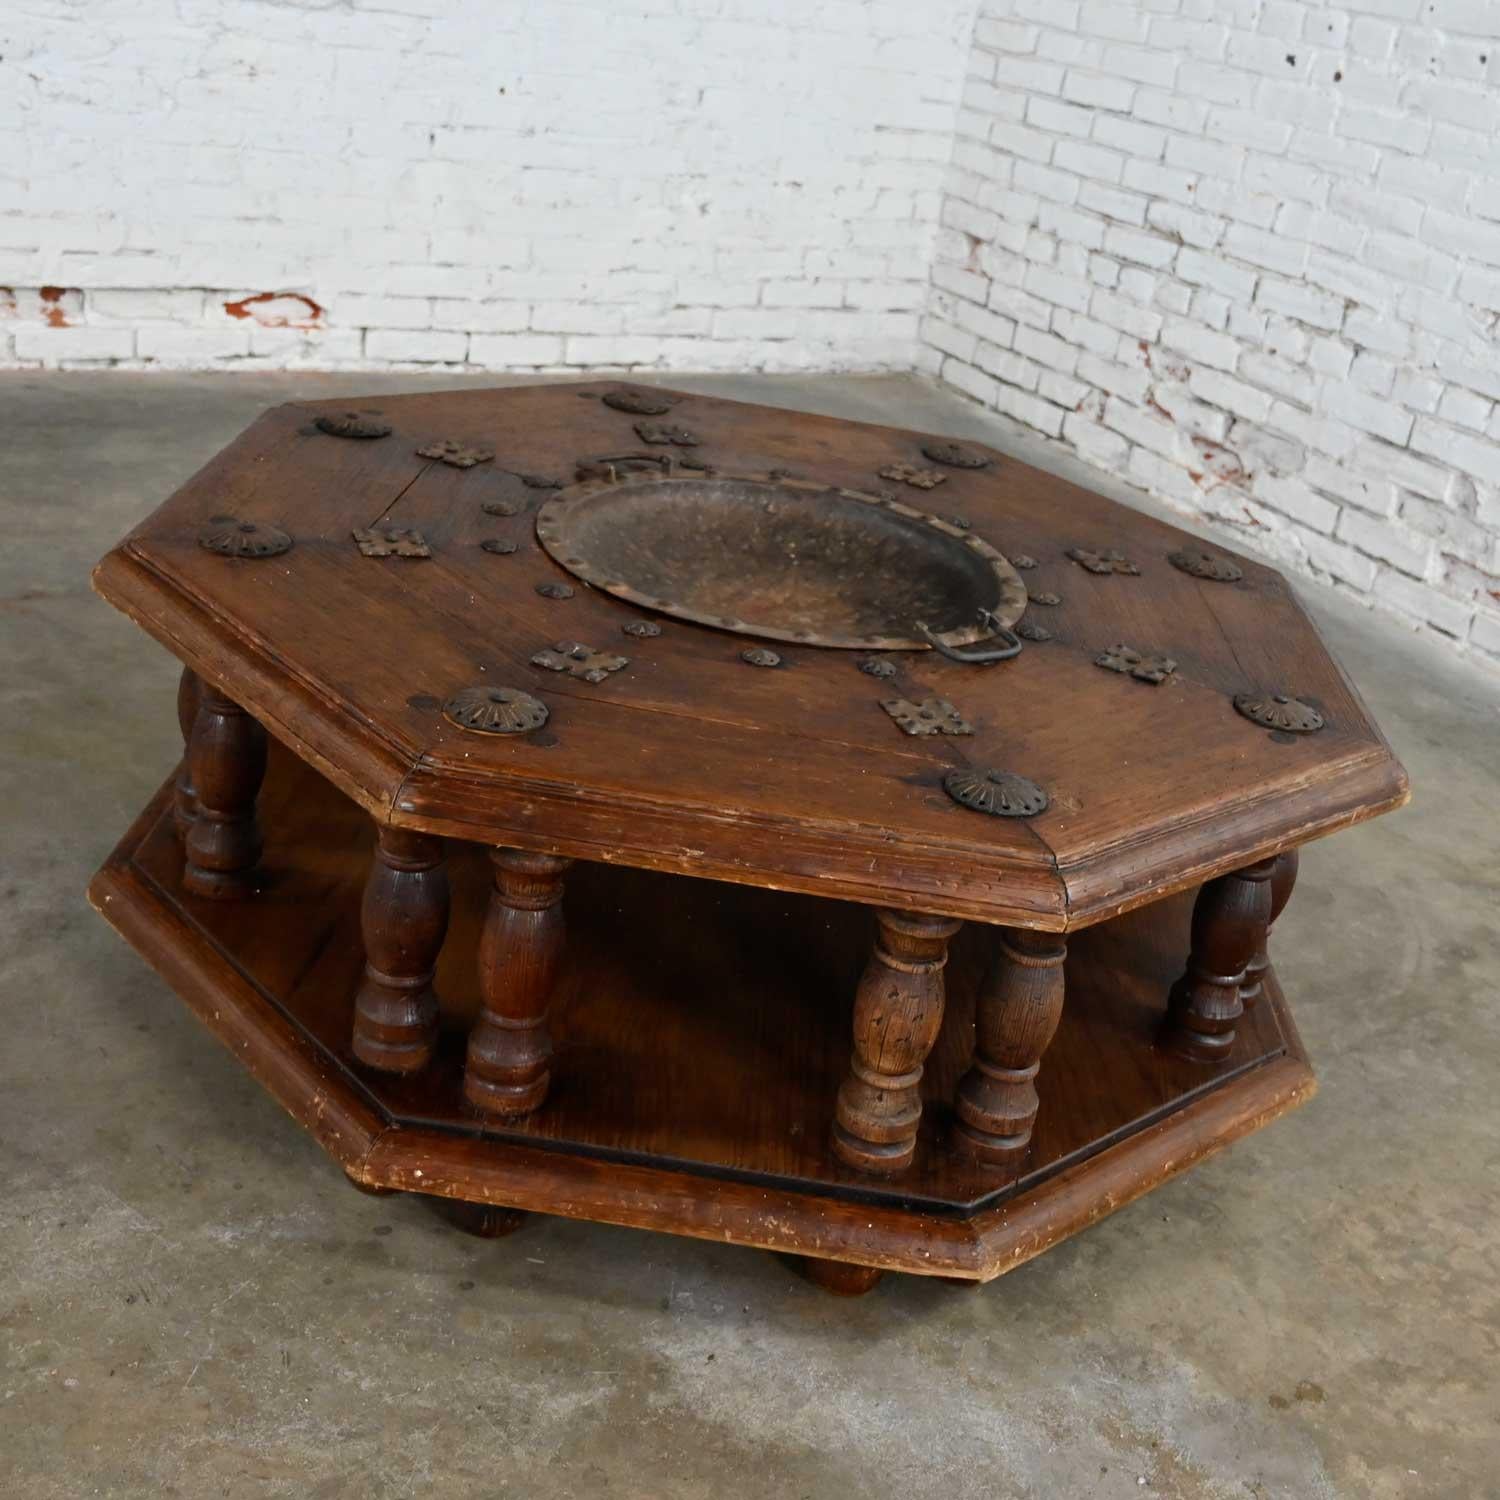 20th Century Spanish Colonial Revival Rustic Octagon Brazier Coffee Table Style Artes De Mexi